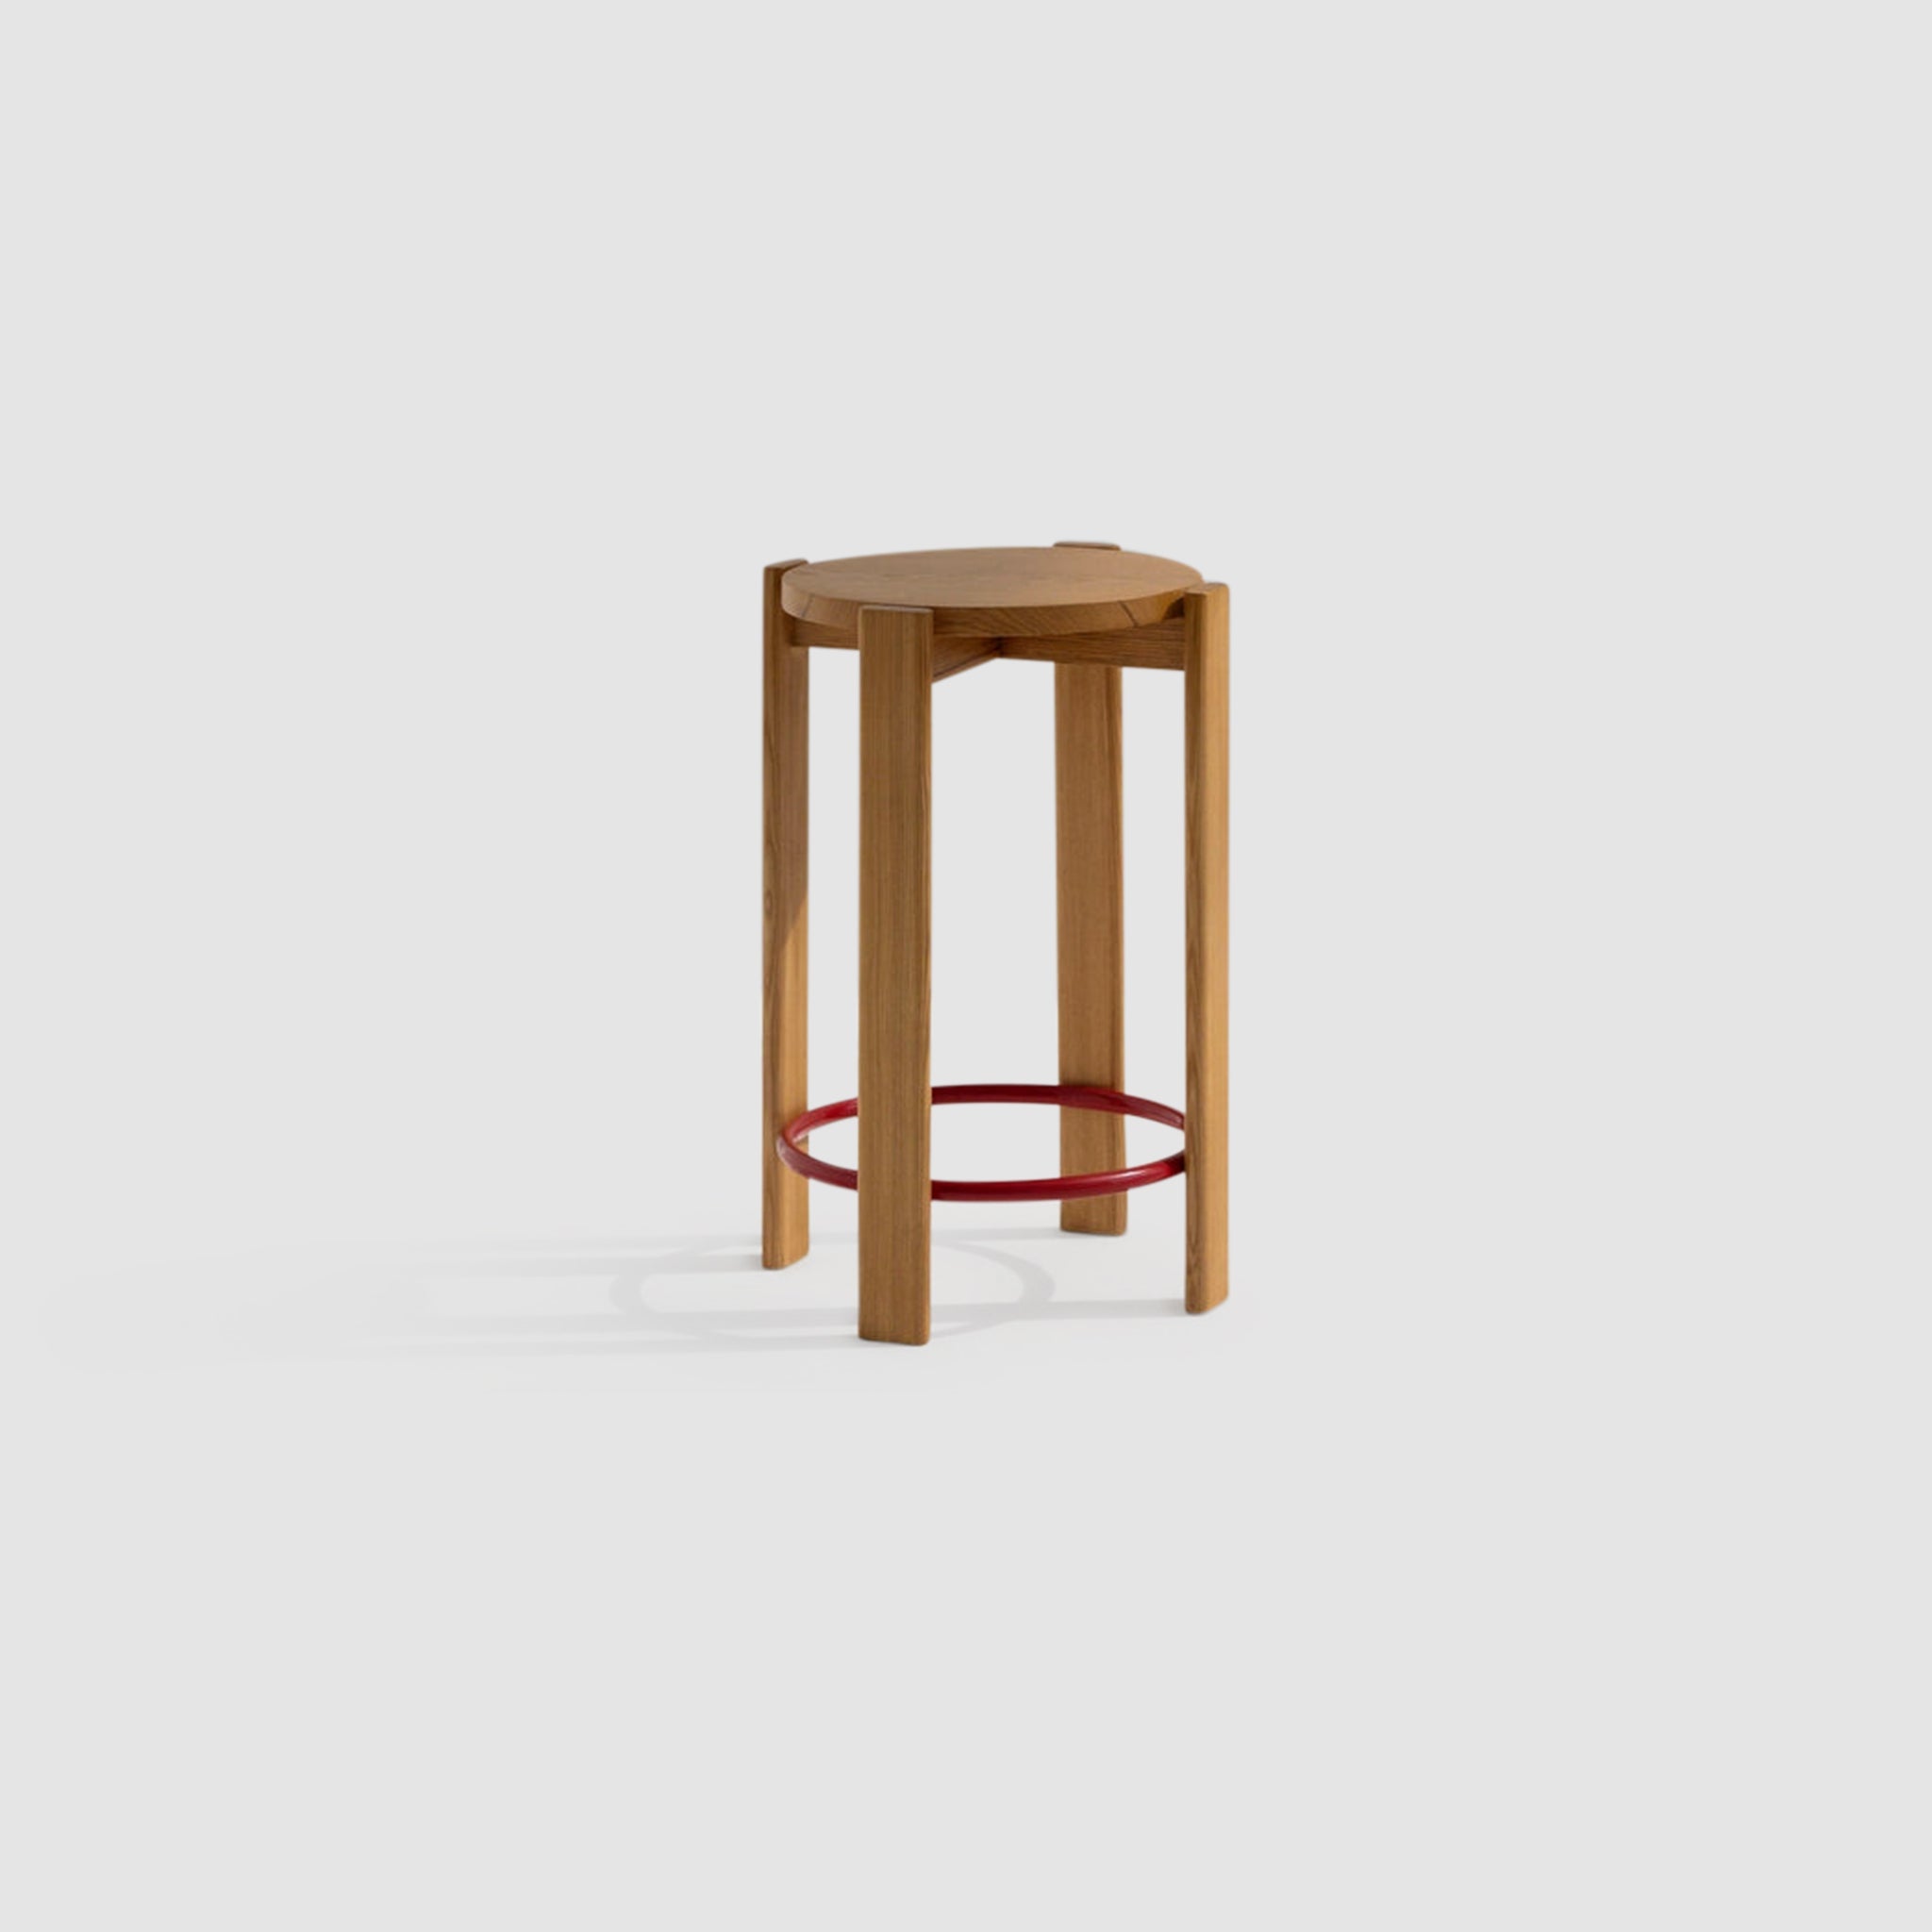 Wooden tall stool with a round seat and a red circular footrest on a white background